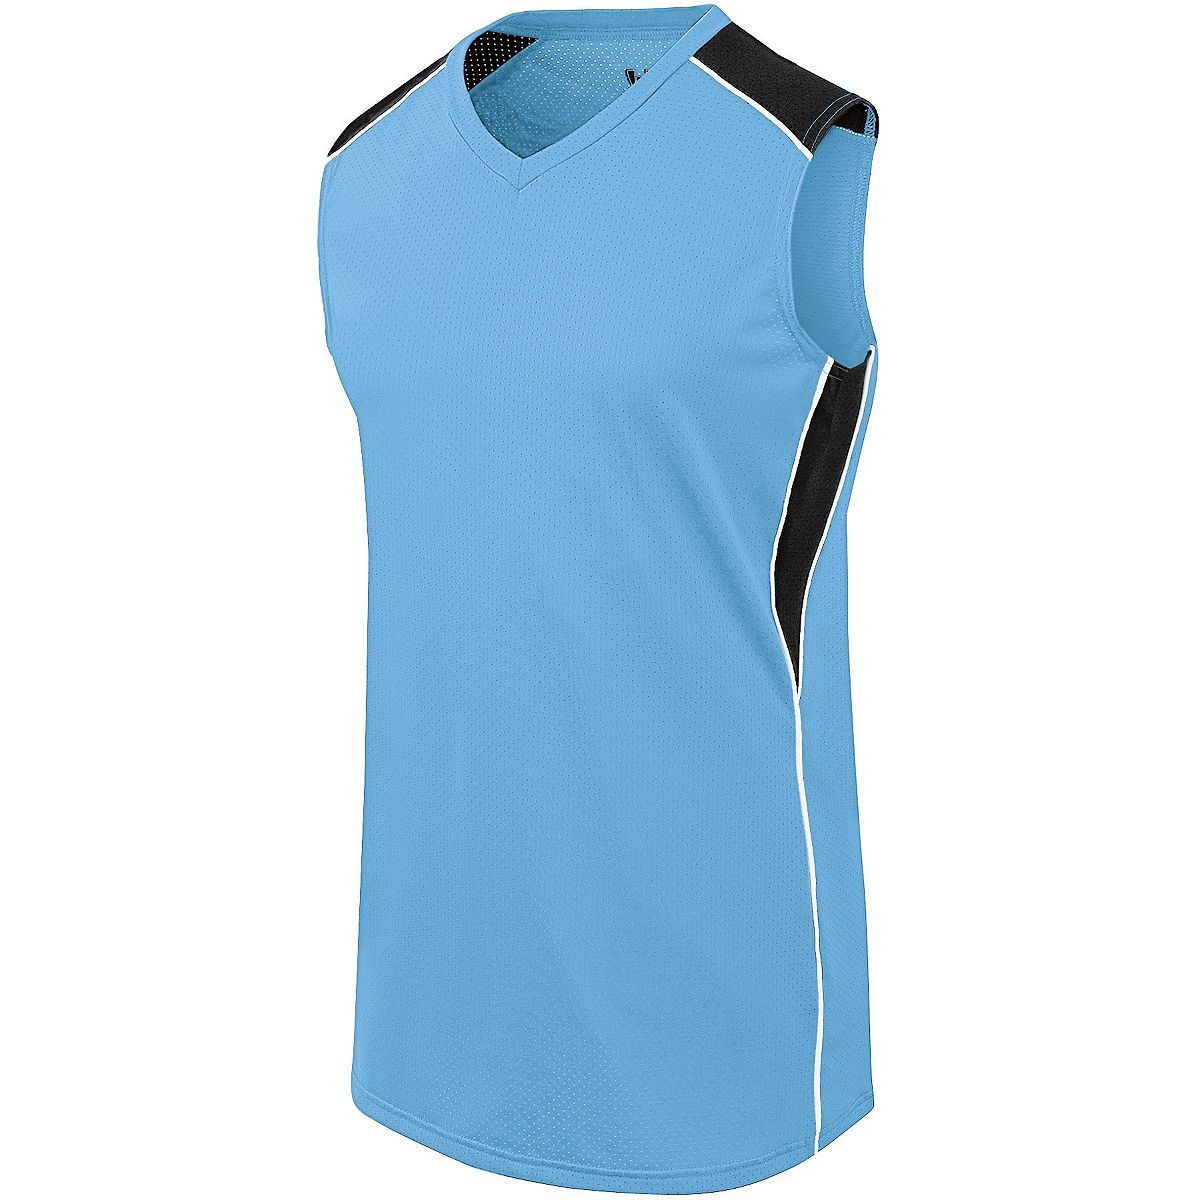 Augusta Sportswear Ladies Dynamite Jersey in Columbia Blue/Black/White  -Part of the Ladies, Ladies-Jersey, Augusta-Products, Softball, Shirts product lines at KanaleyCreations.com